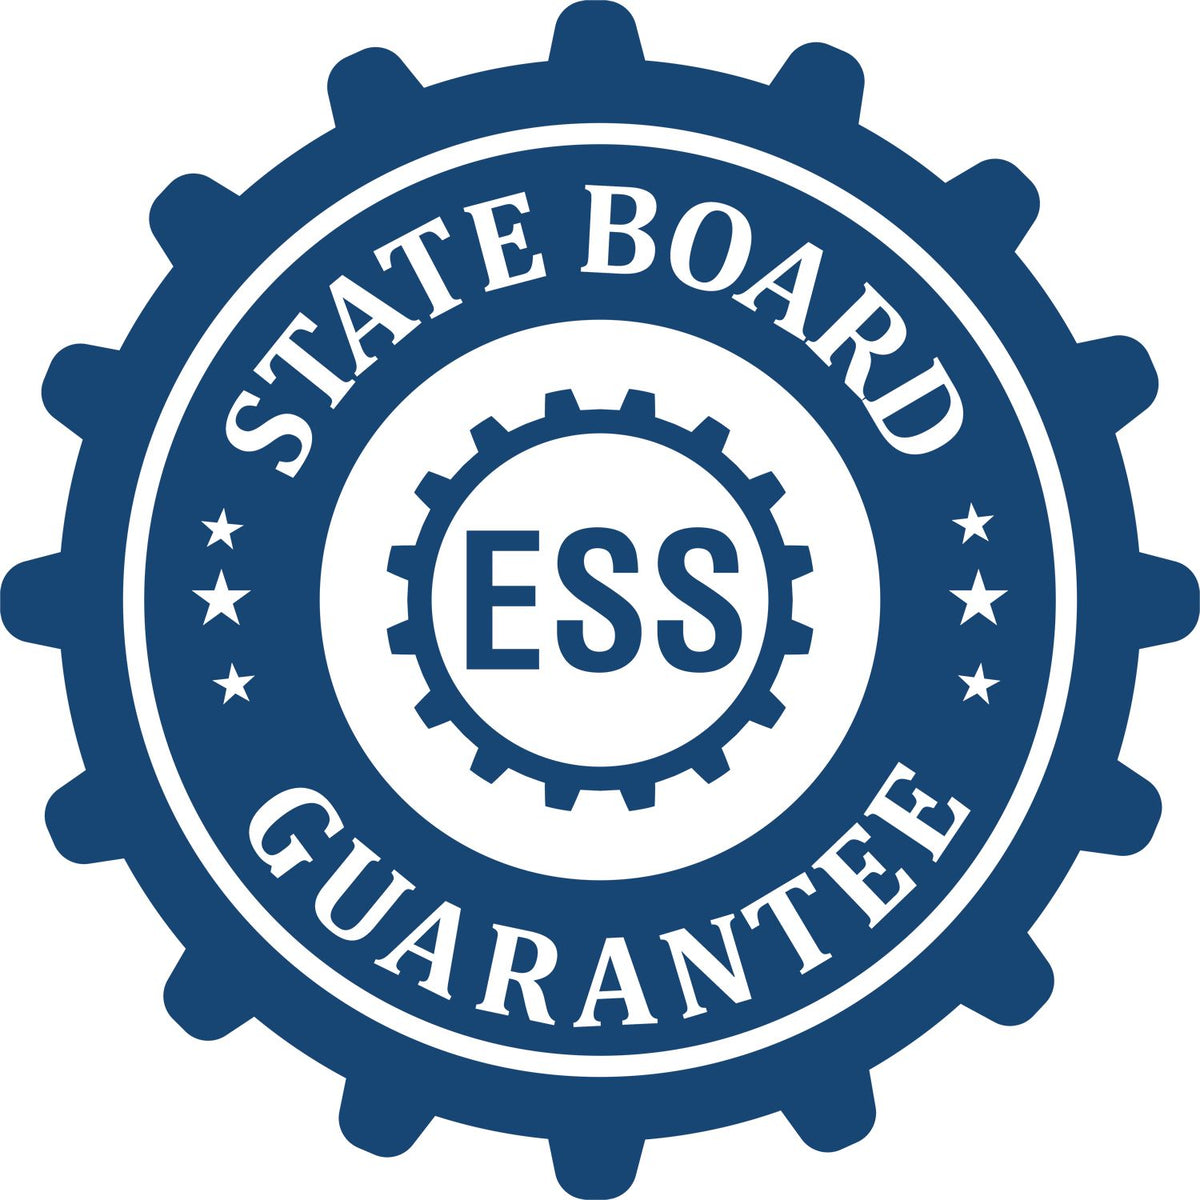 An emblem in a gear shape illustrating a state board guarantee for the Digital New Jersey Landscape Architect Stamp product.